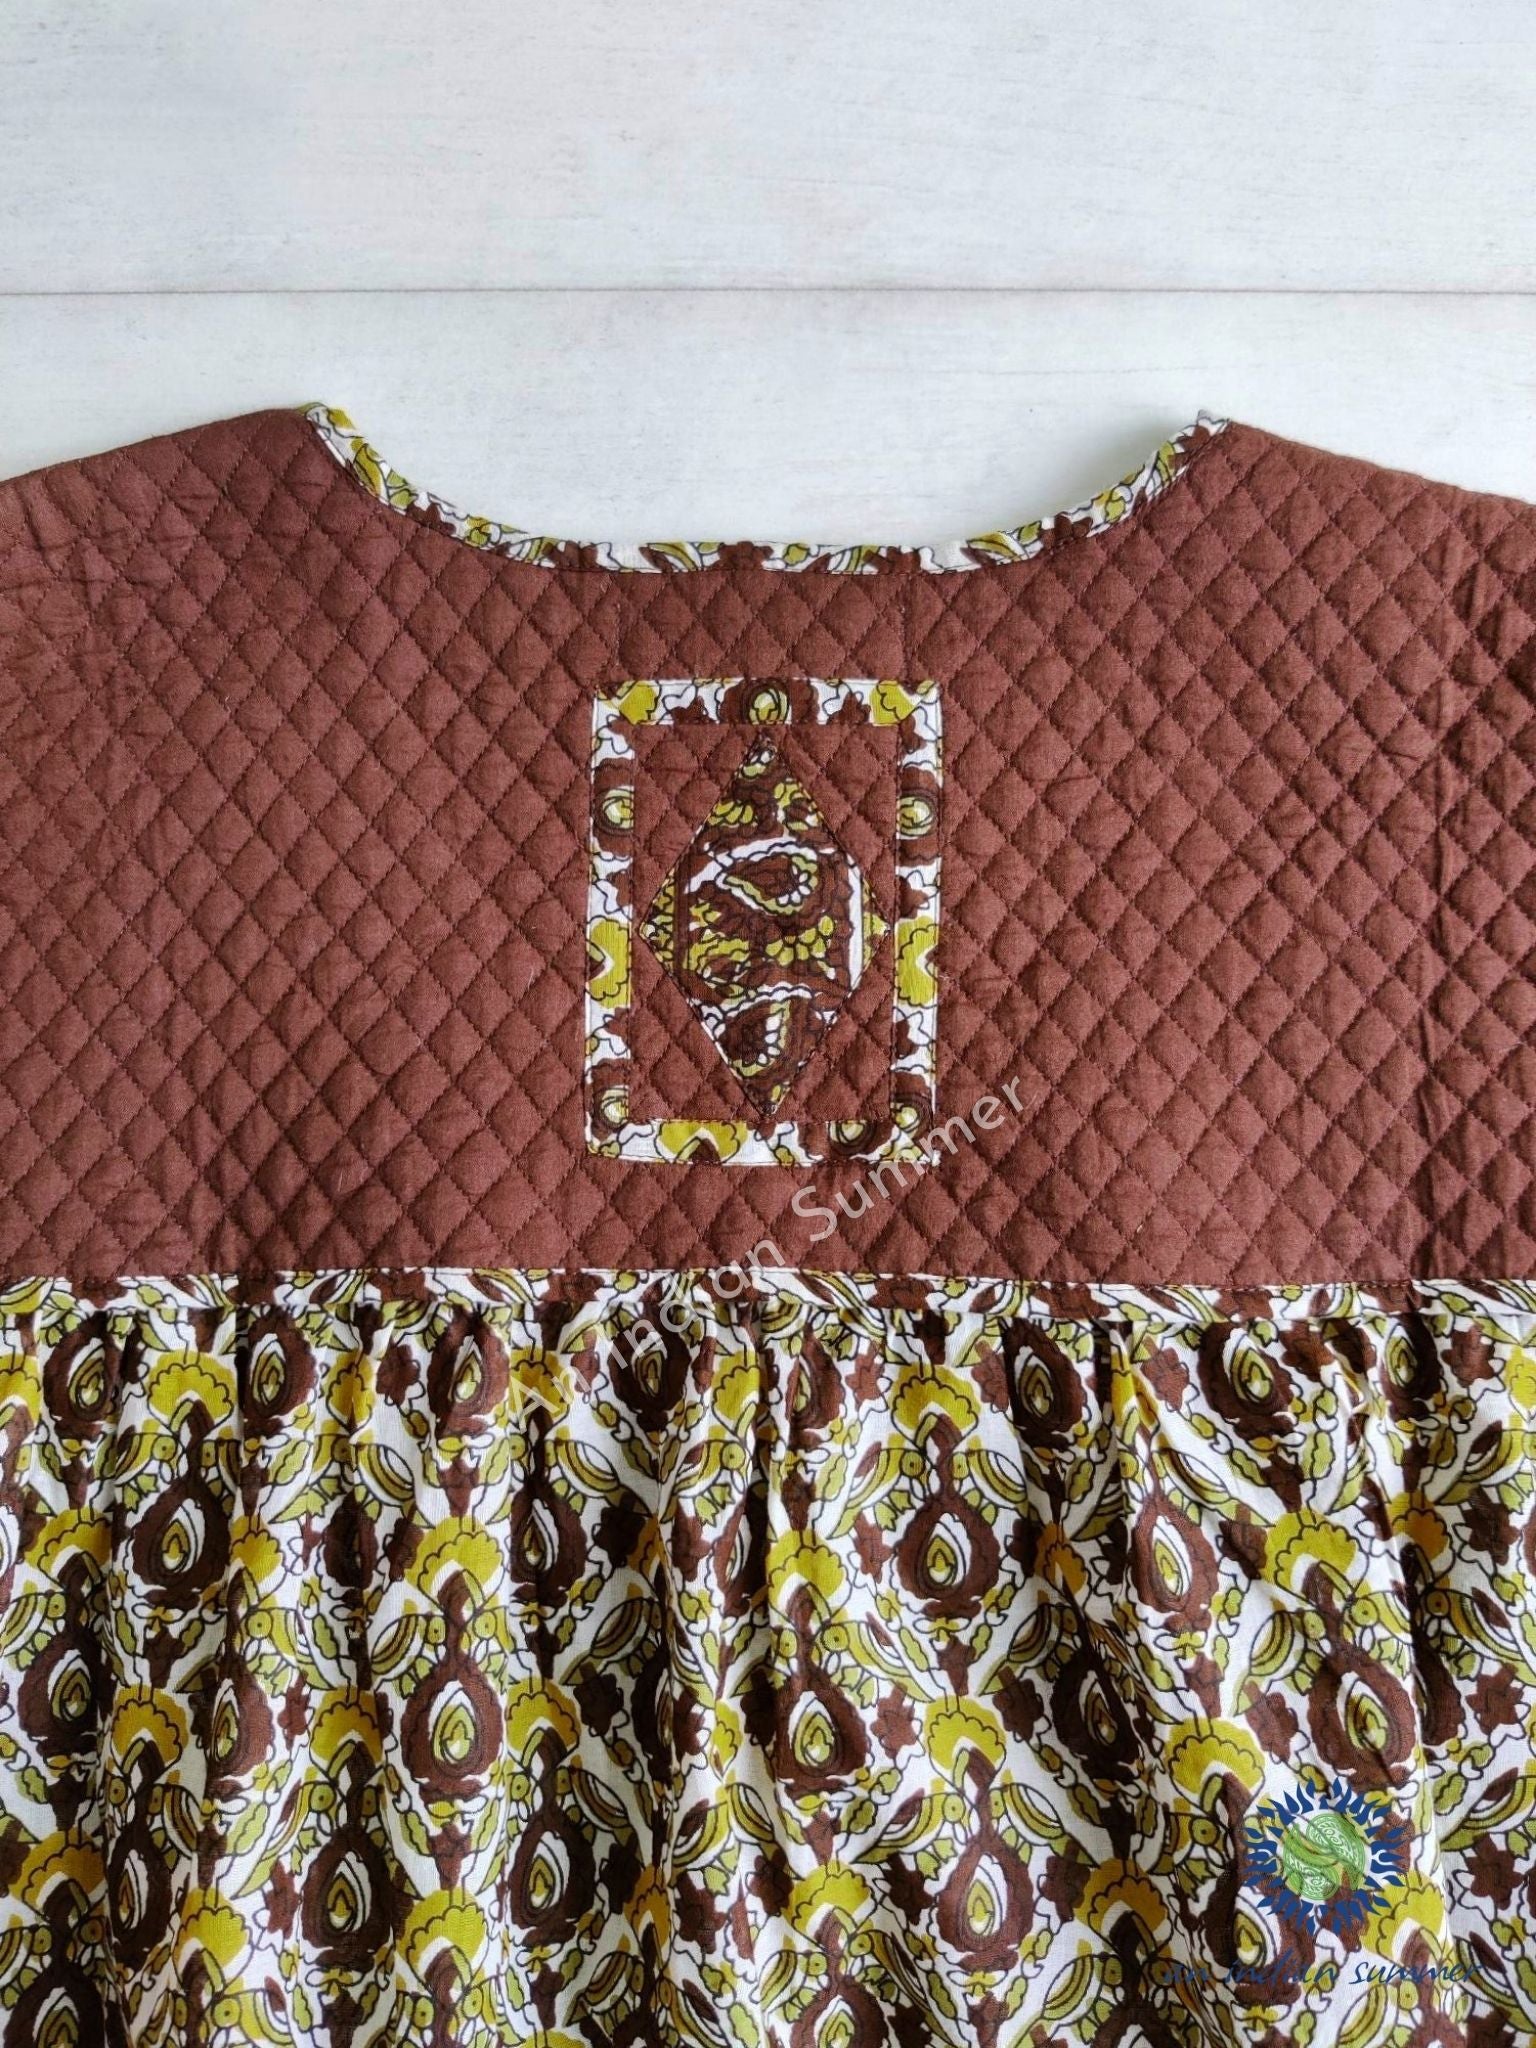 Quilted Patch Detail | Vintage Quilted Dress Chestnut Brown | Cotton Voile | An Indian Summer | Seasonless Timeless Sustainable Ethical Authentic Artisan Conscious Clothing Lifestyle Brand